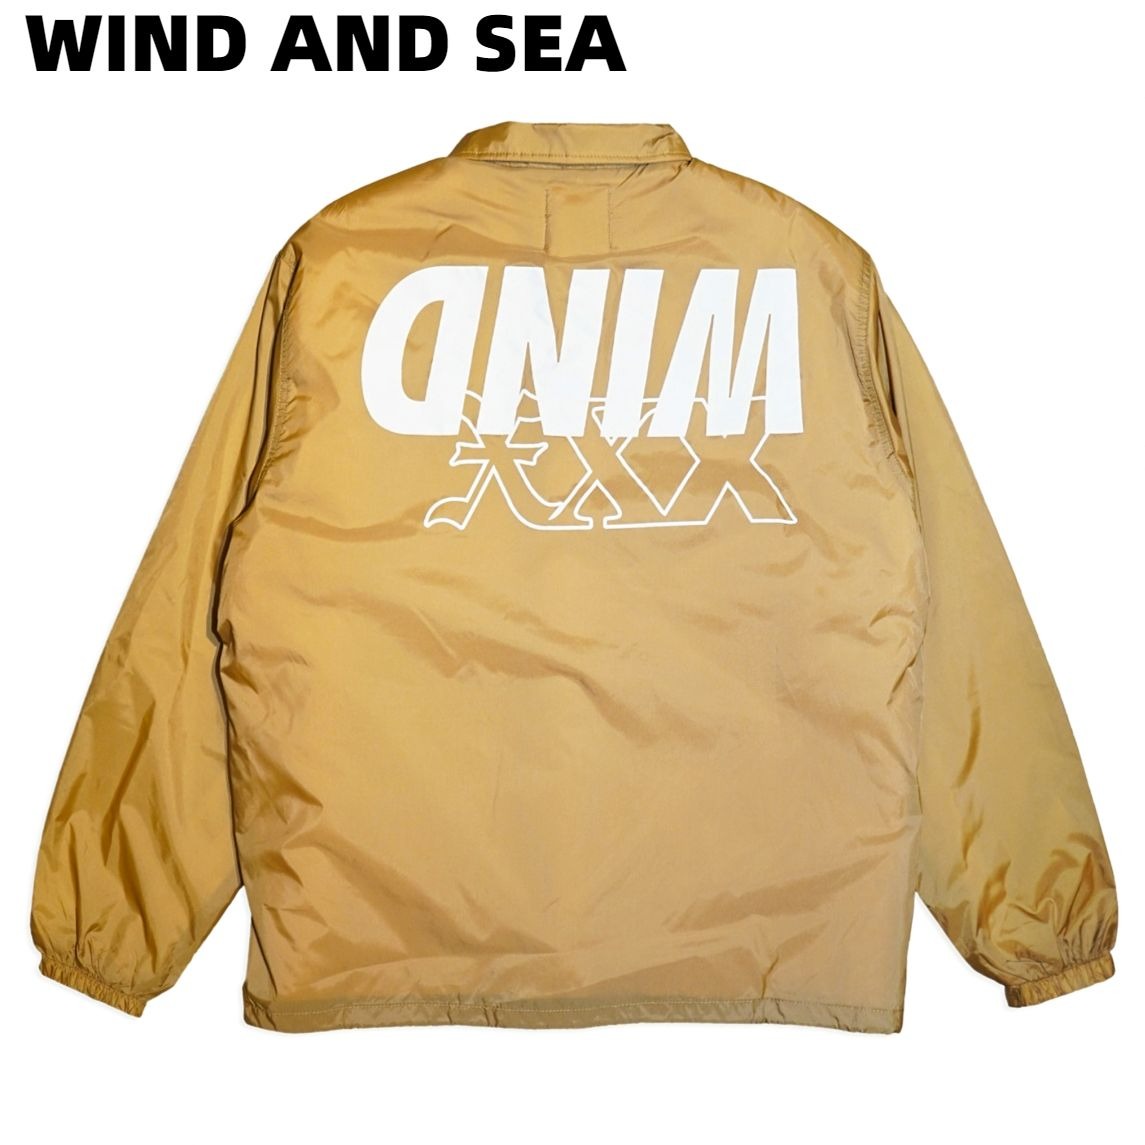 wind and sea god selection xxx コーチジャケット | www.myglobaltax.com